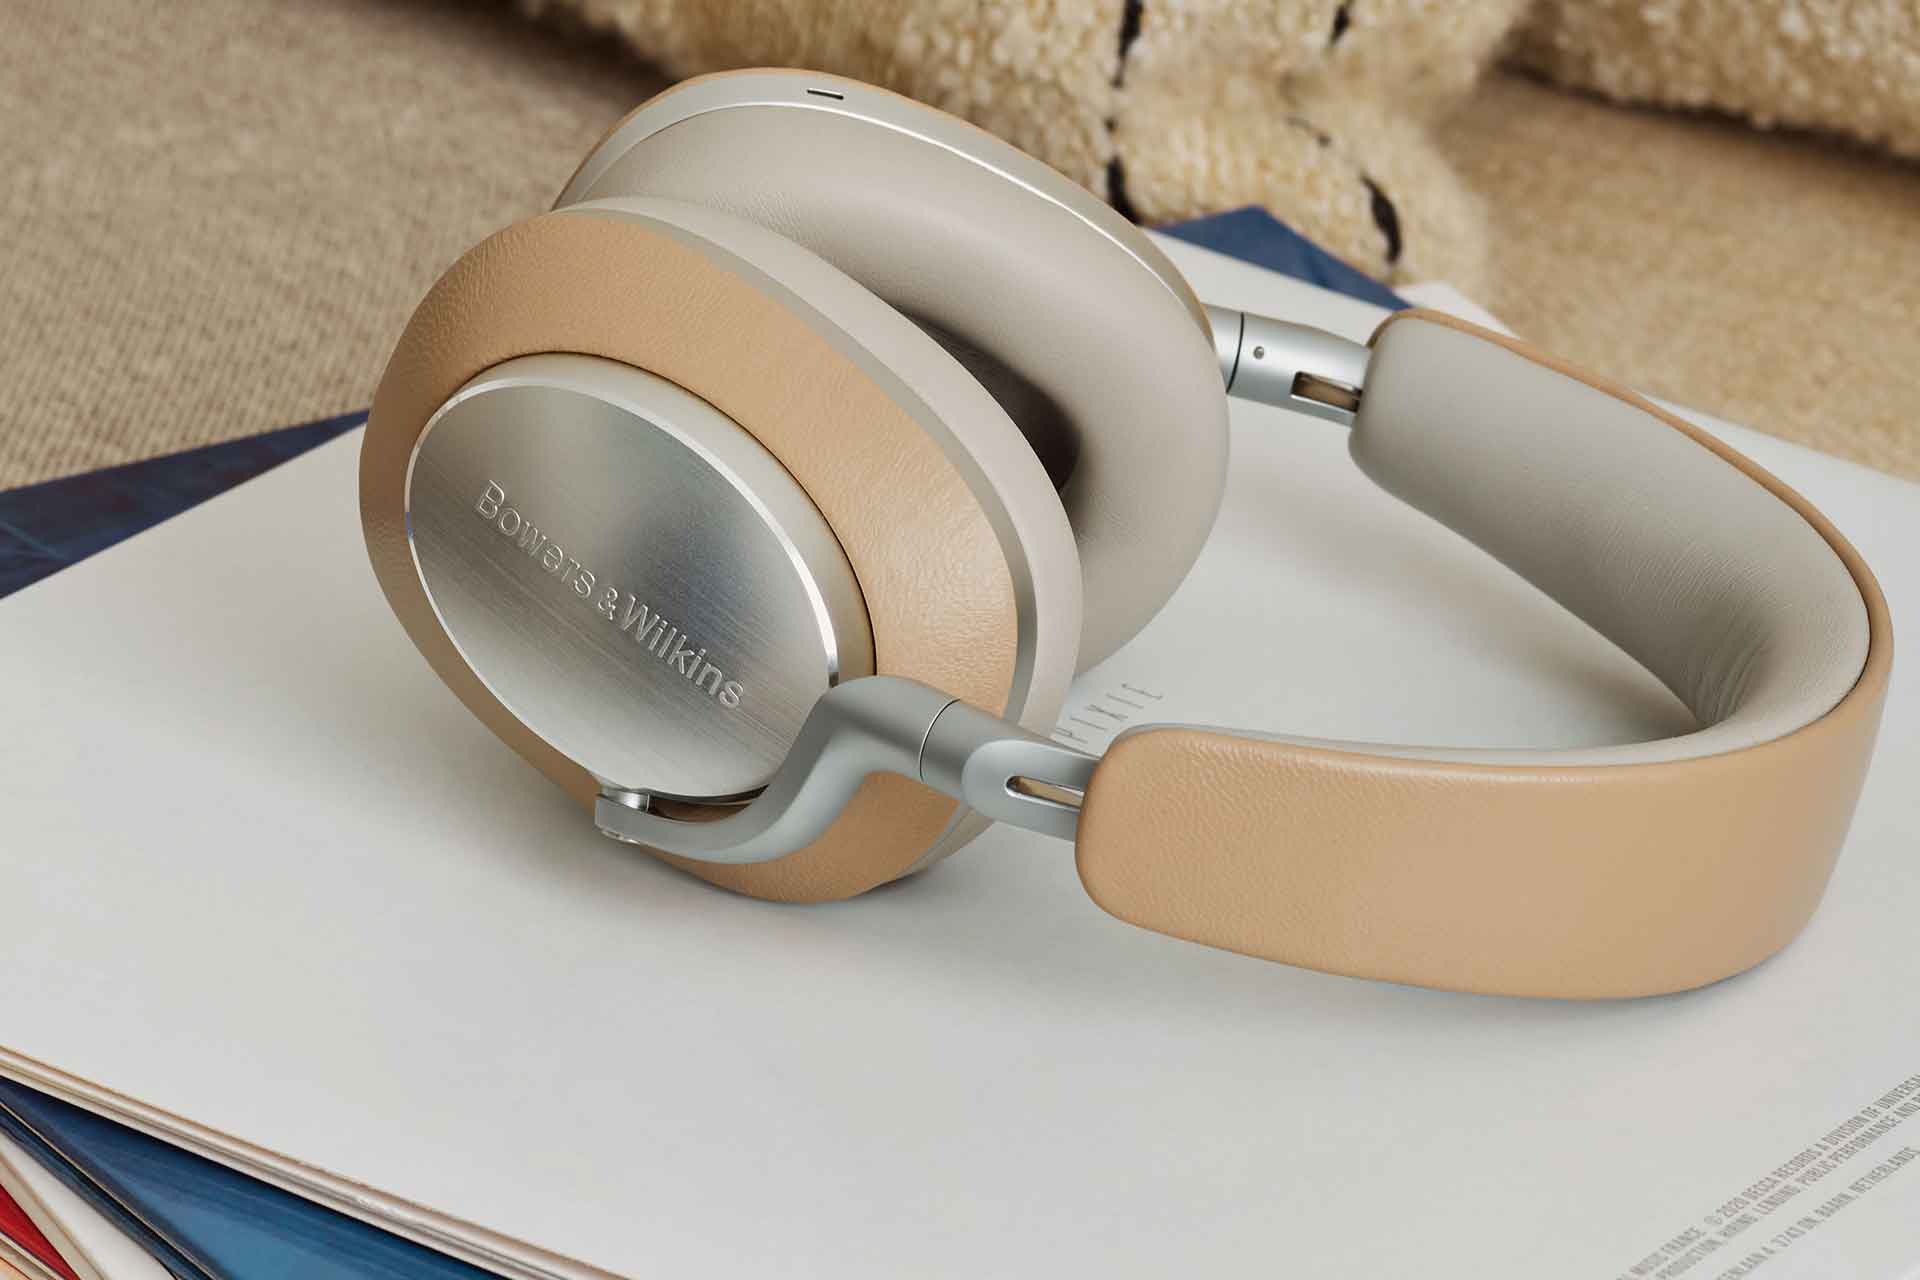 Bowers & Wilkins PX8 Wireless Over-Ear Headphones - James Bond Special  Edition